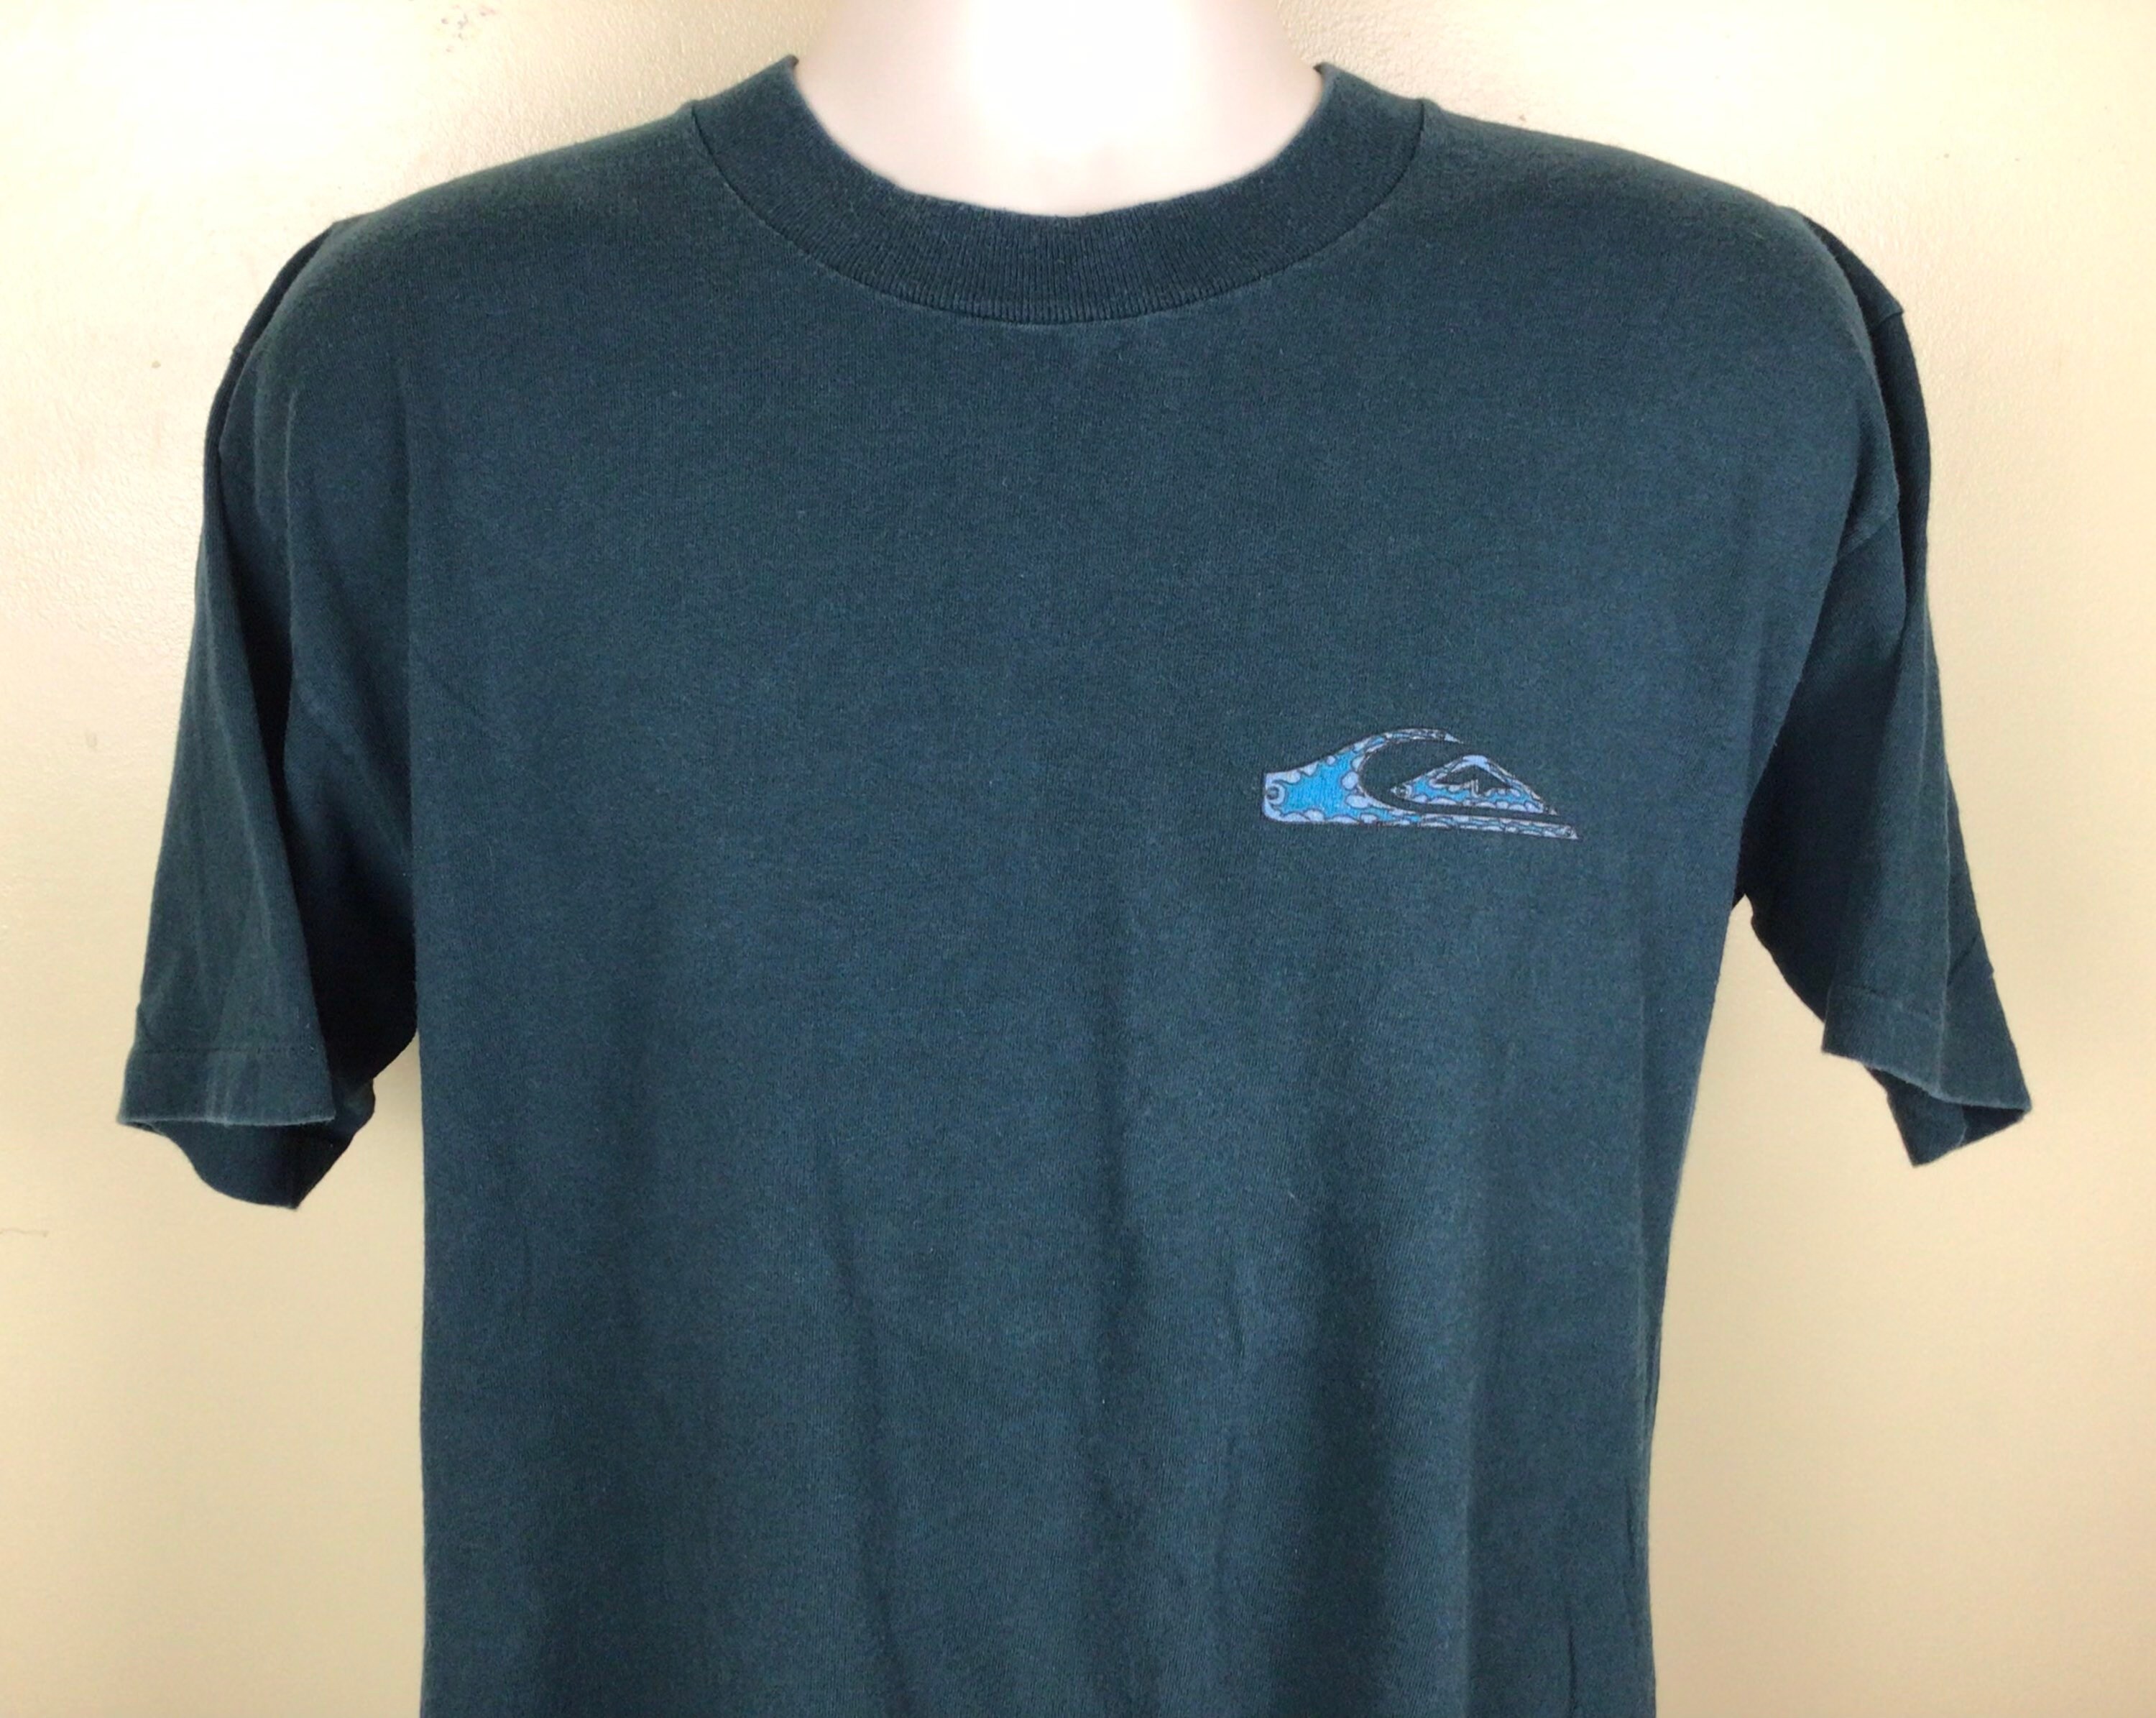 Quiksilver - Green T-shirt Made Single Skate USA Finland Surf Stitch Vtg L Teal in Brand Etsy 90s